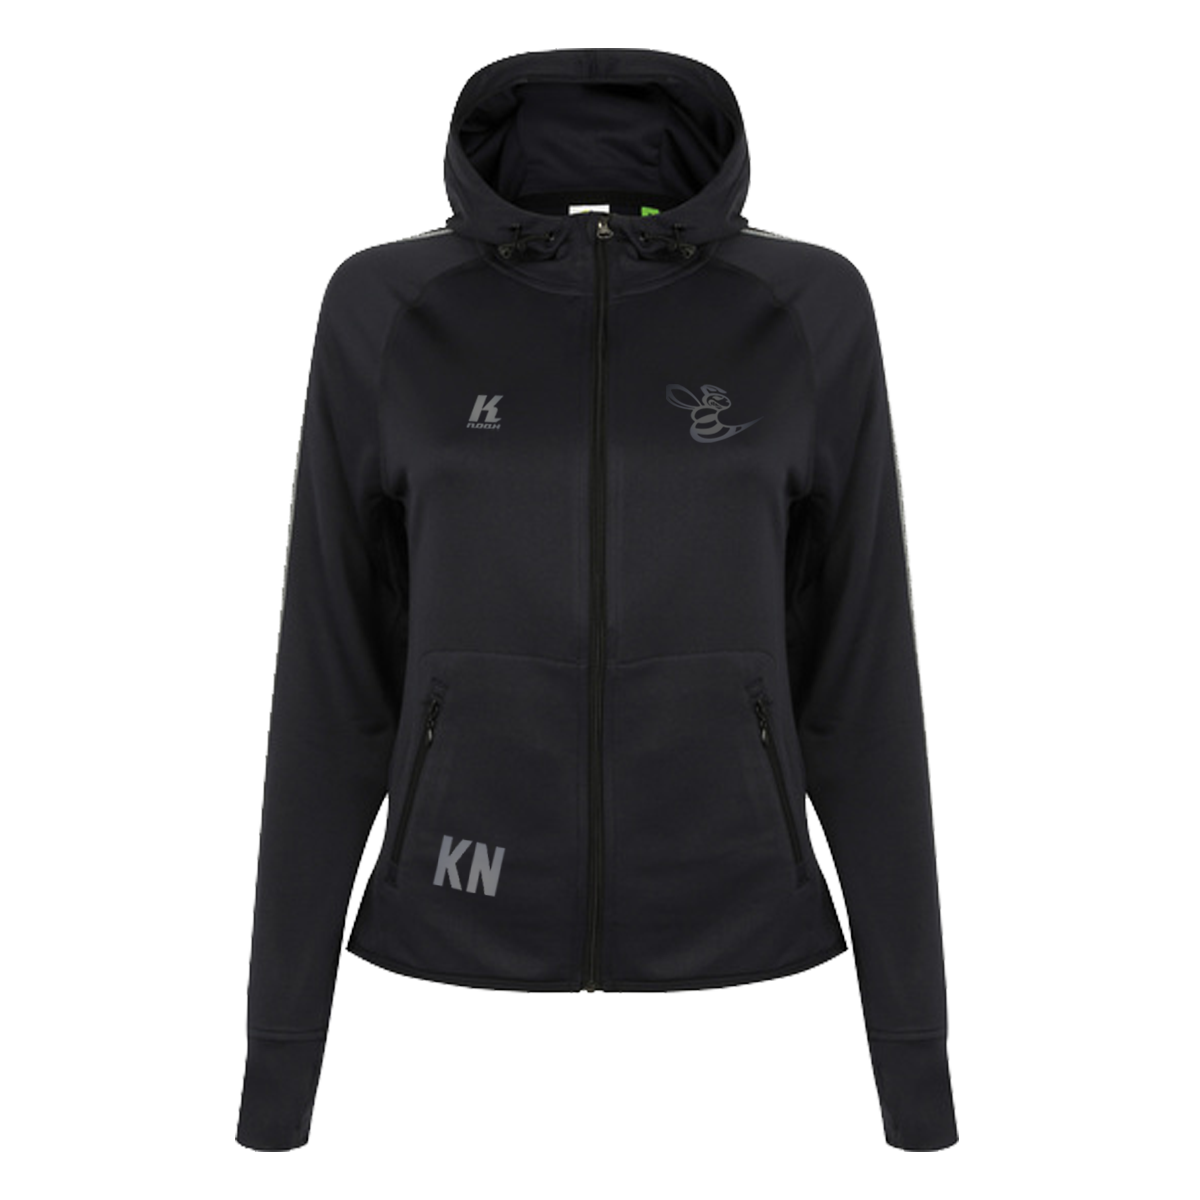 Hornets "Blackline" Womens Zip Hoodie TL551 with Initials/Playernumber